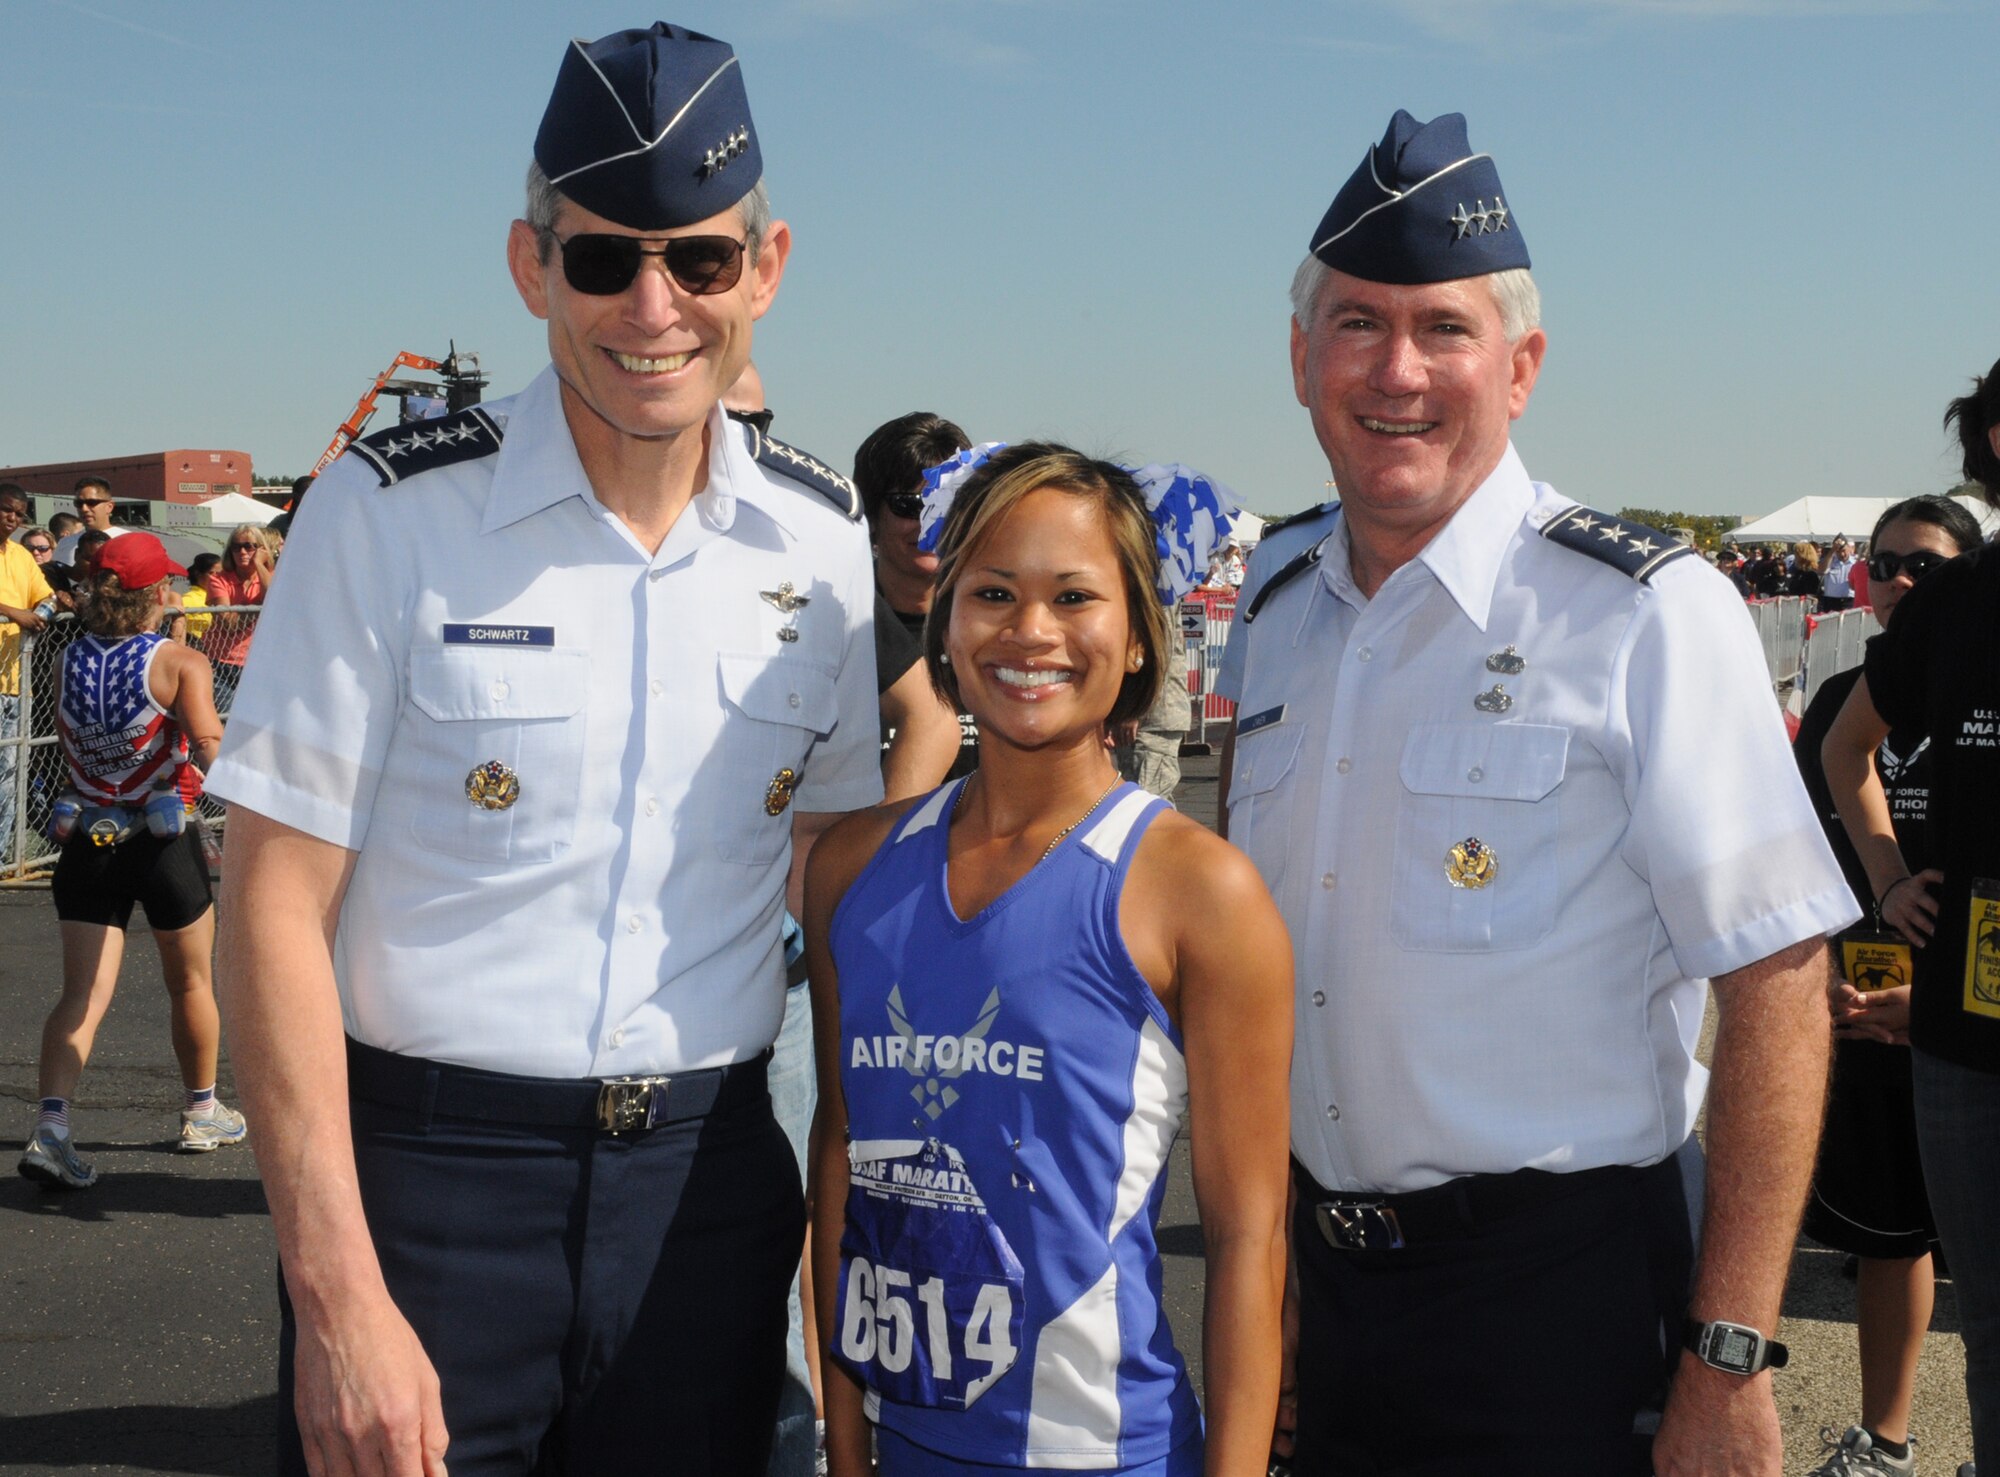 Air Force Chief of Staff Gen. Norton Schwartz and Aeronautical Systems Center commander, Lt. Gen. Tom Owen join Staff Sgt. Trasy Rincan at the finish line for the U.S. Air Force Marathon Sept. 19, 2009 at Wright-Patterson Air Force Base, Ohio.  Rincan ran the half marathon in 1:29:51, finishing 8th among all female runners.  She is a security forces specialist with the 88th Security Forces Squadron at Wright-Patt. (Air Force photo/Al Bright)